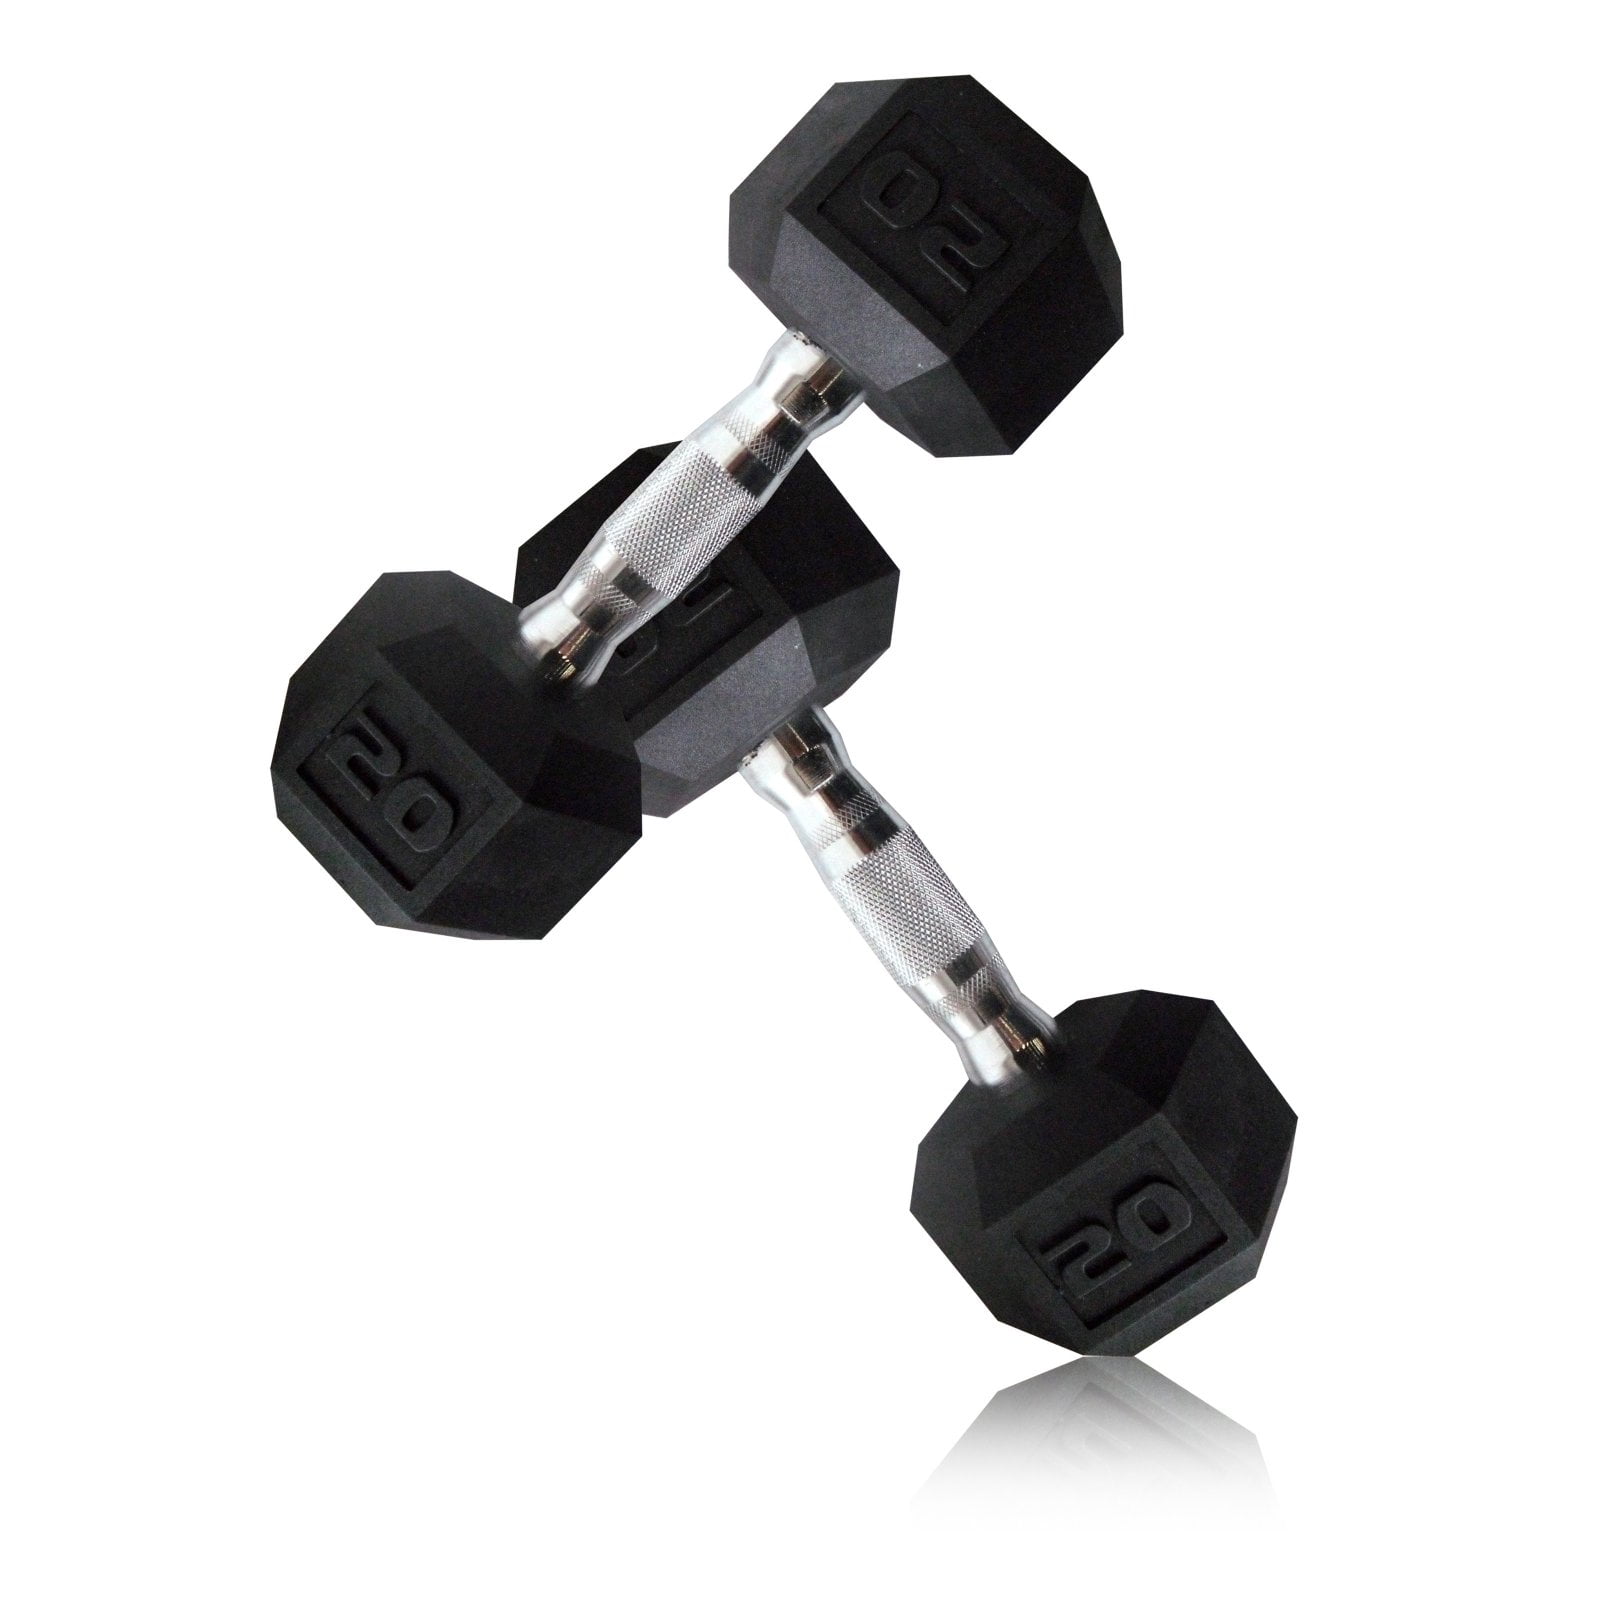 CAP Rubber Coated Hex FREE SHIPPING 20 lbs.total weight 10lb Dumbbell Set NEW 